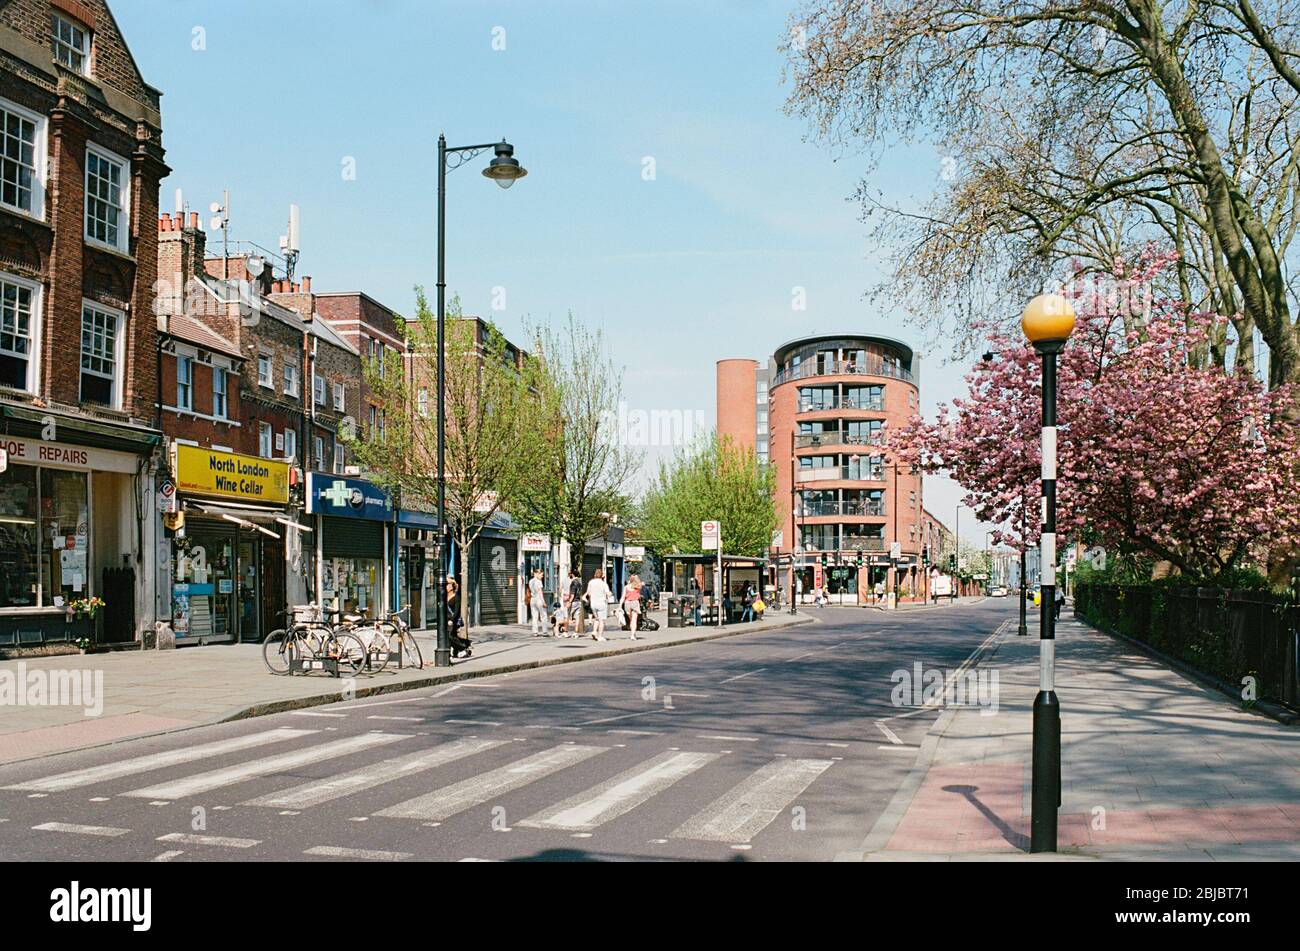 Newington Green Road at Newington Green, North London UK, with shops and pedestrians Stock Photo